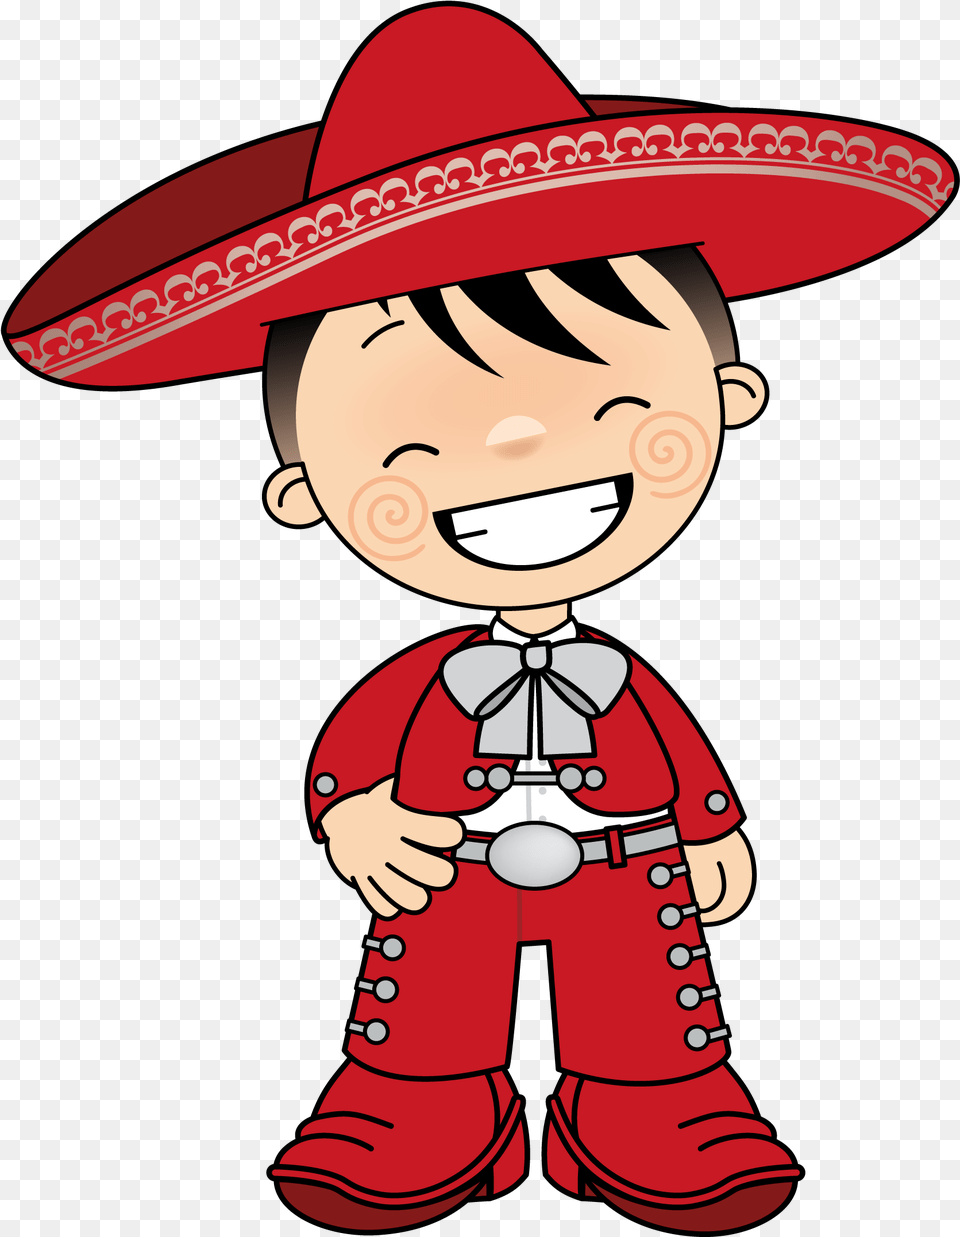 Clip Art Mexican Man With Mustache Charros Mexicanos Animados, Clothing, Hat, Baby, Person Png Image